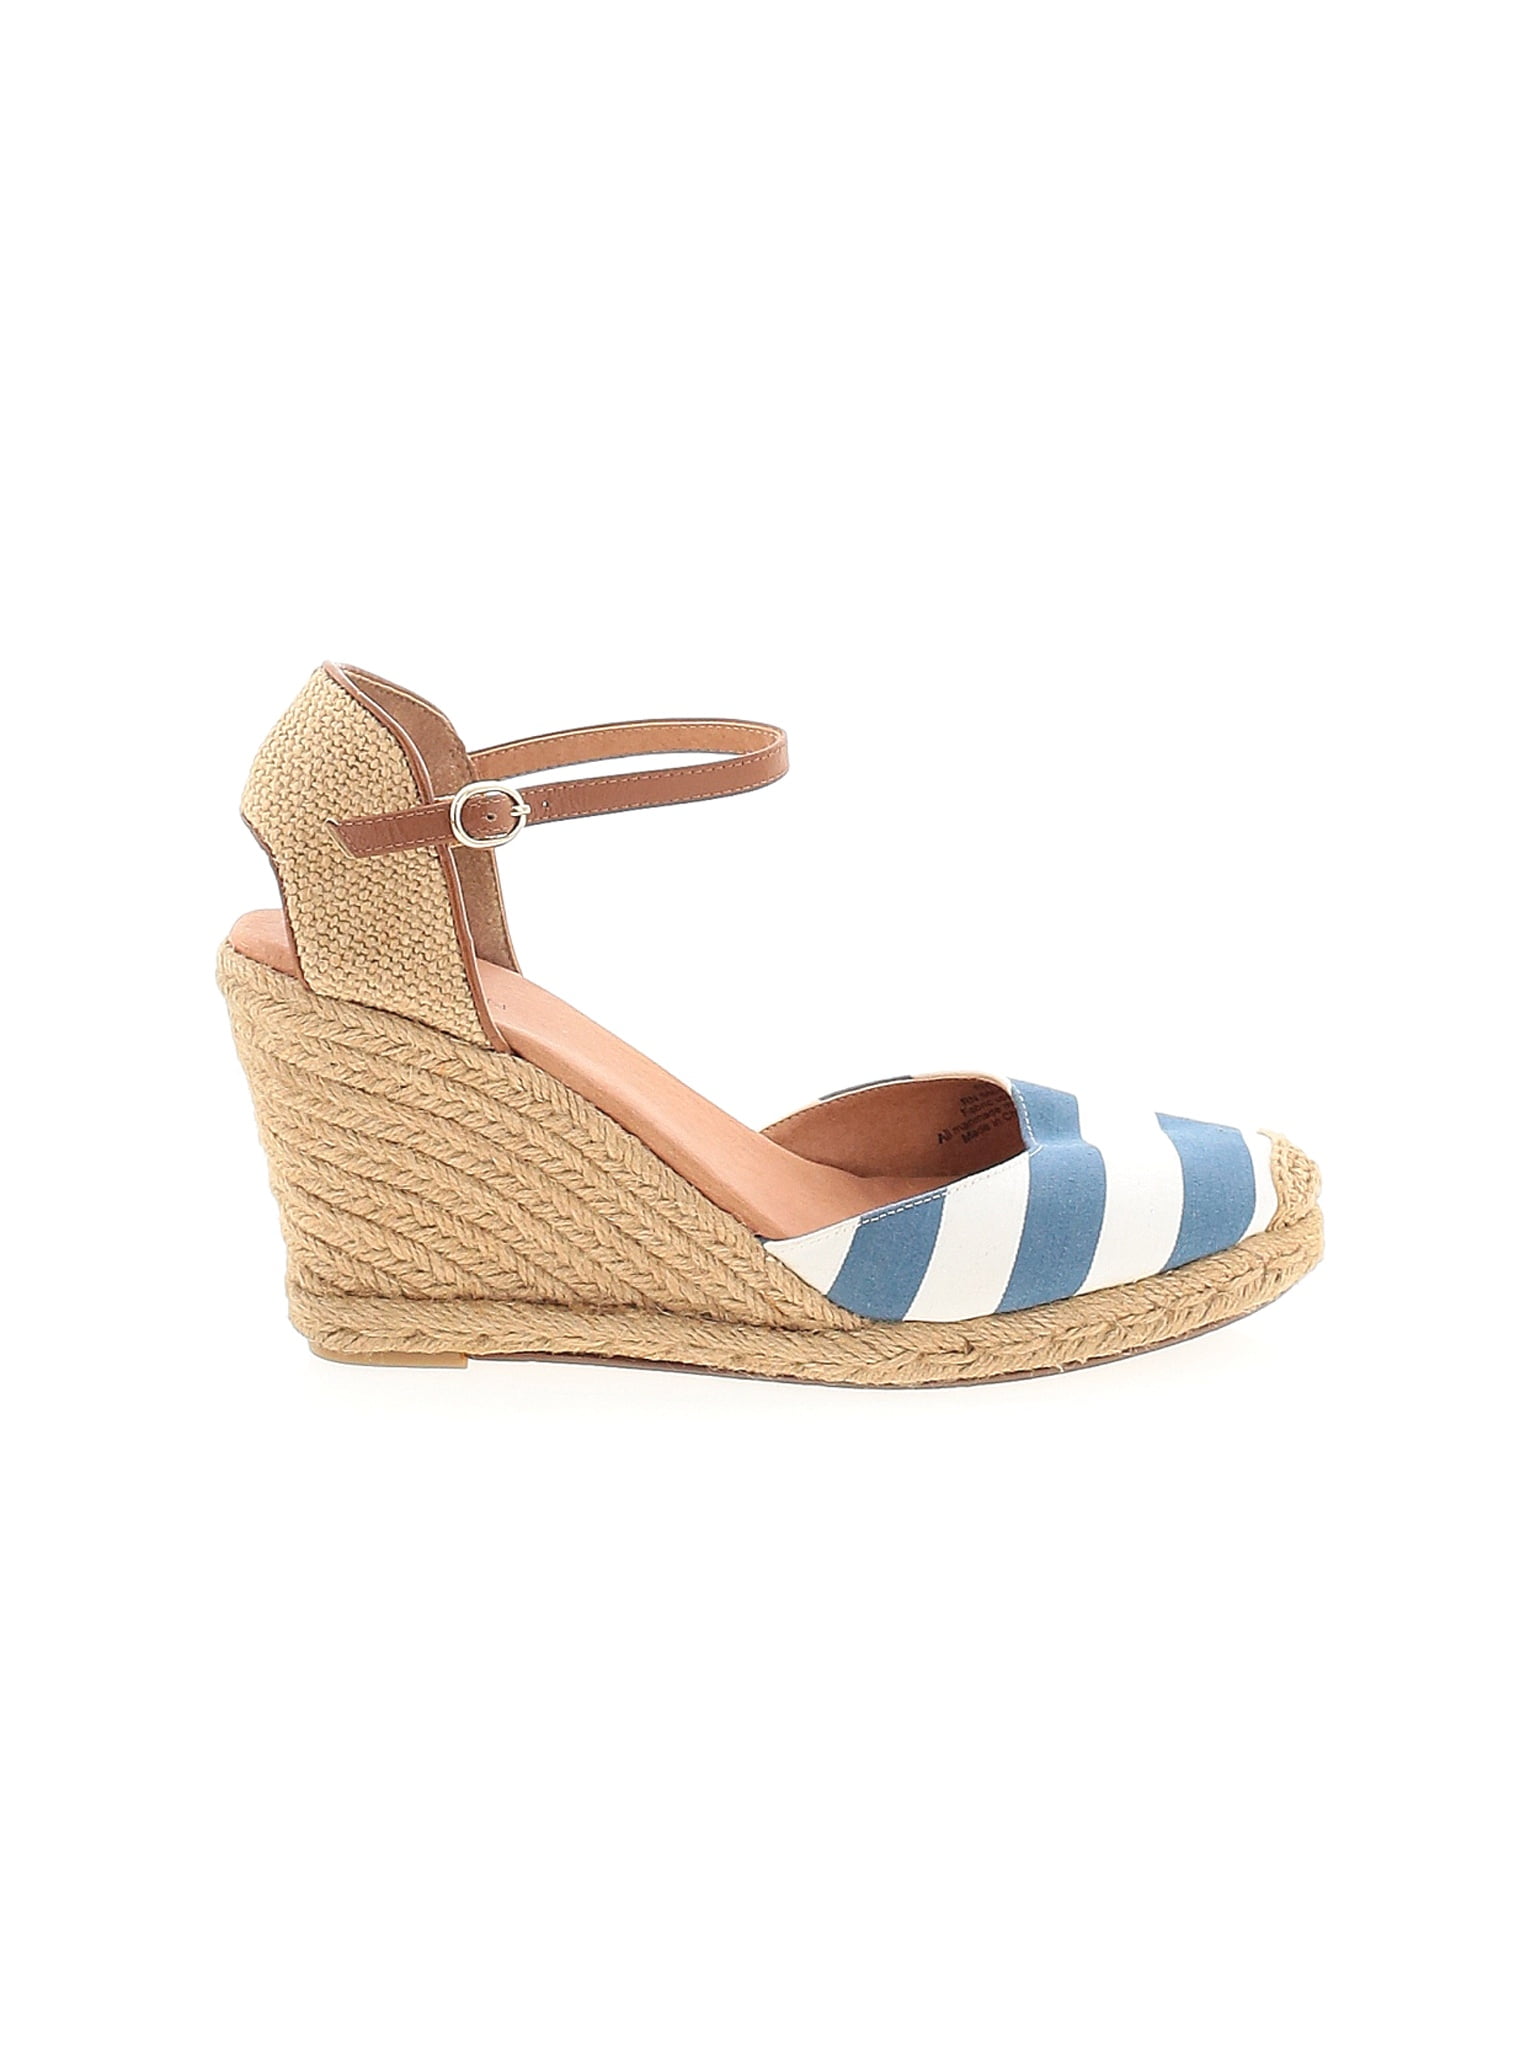 Pre-Owned Caslon Women's Size 9 Wedges 